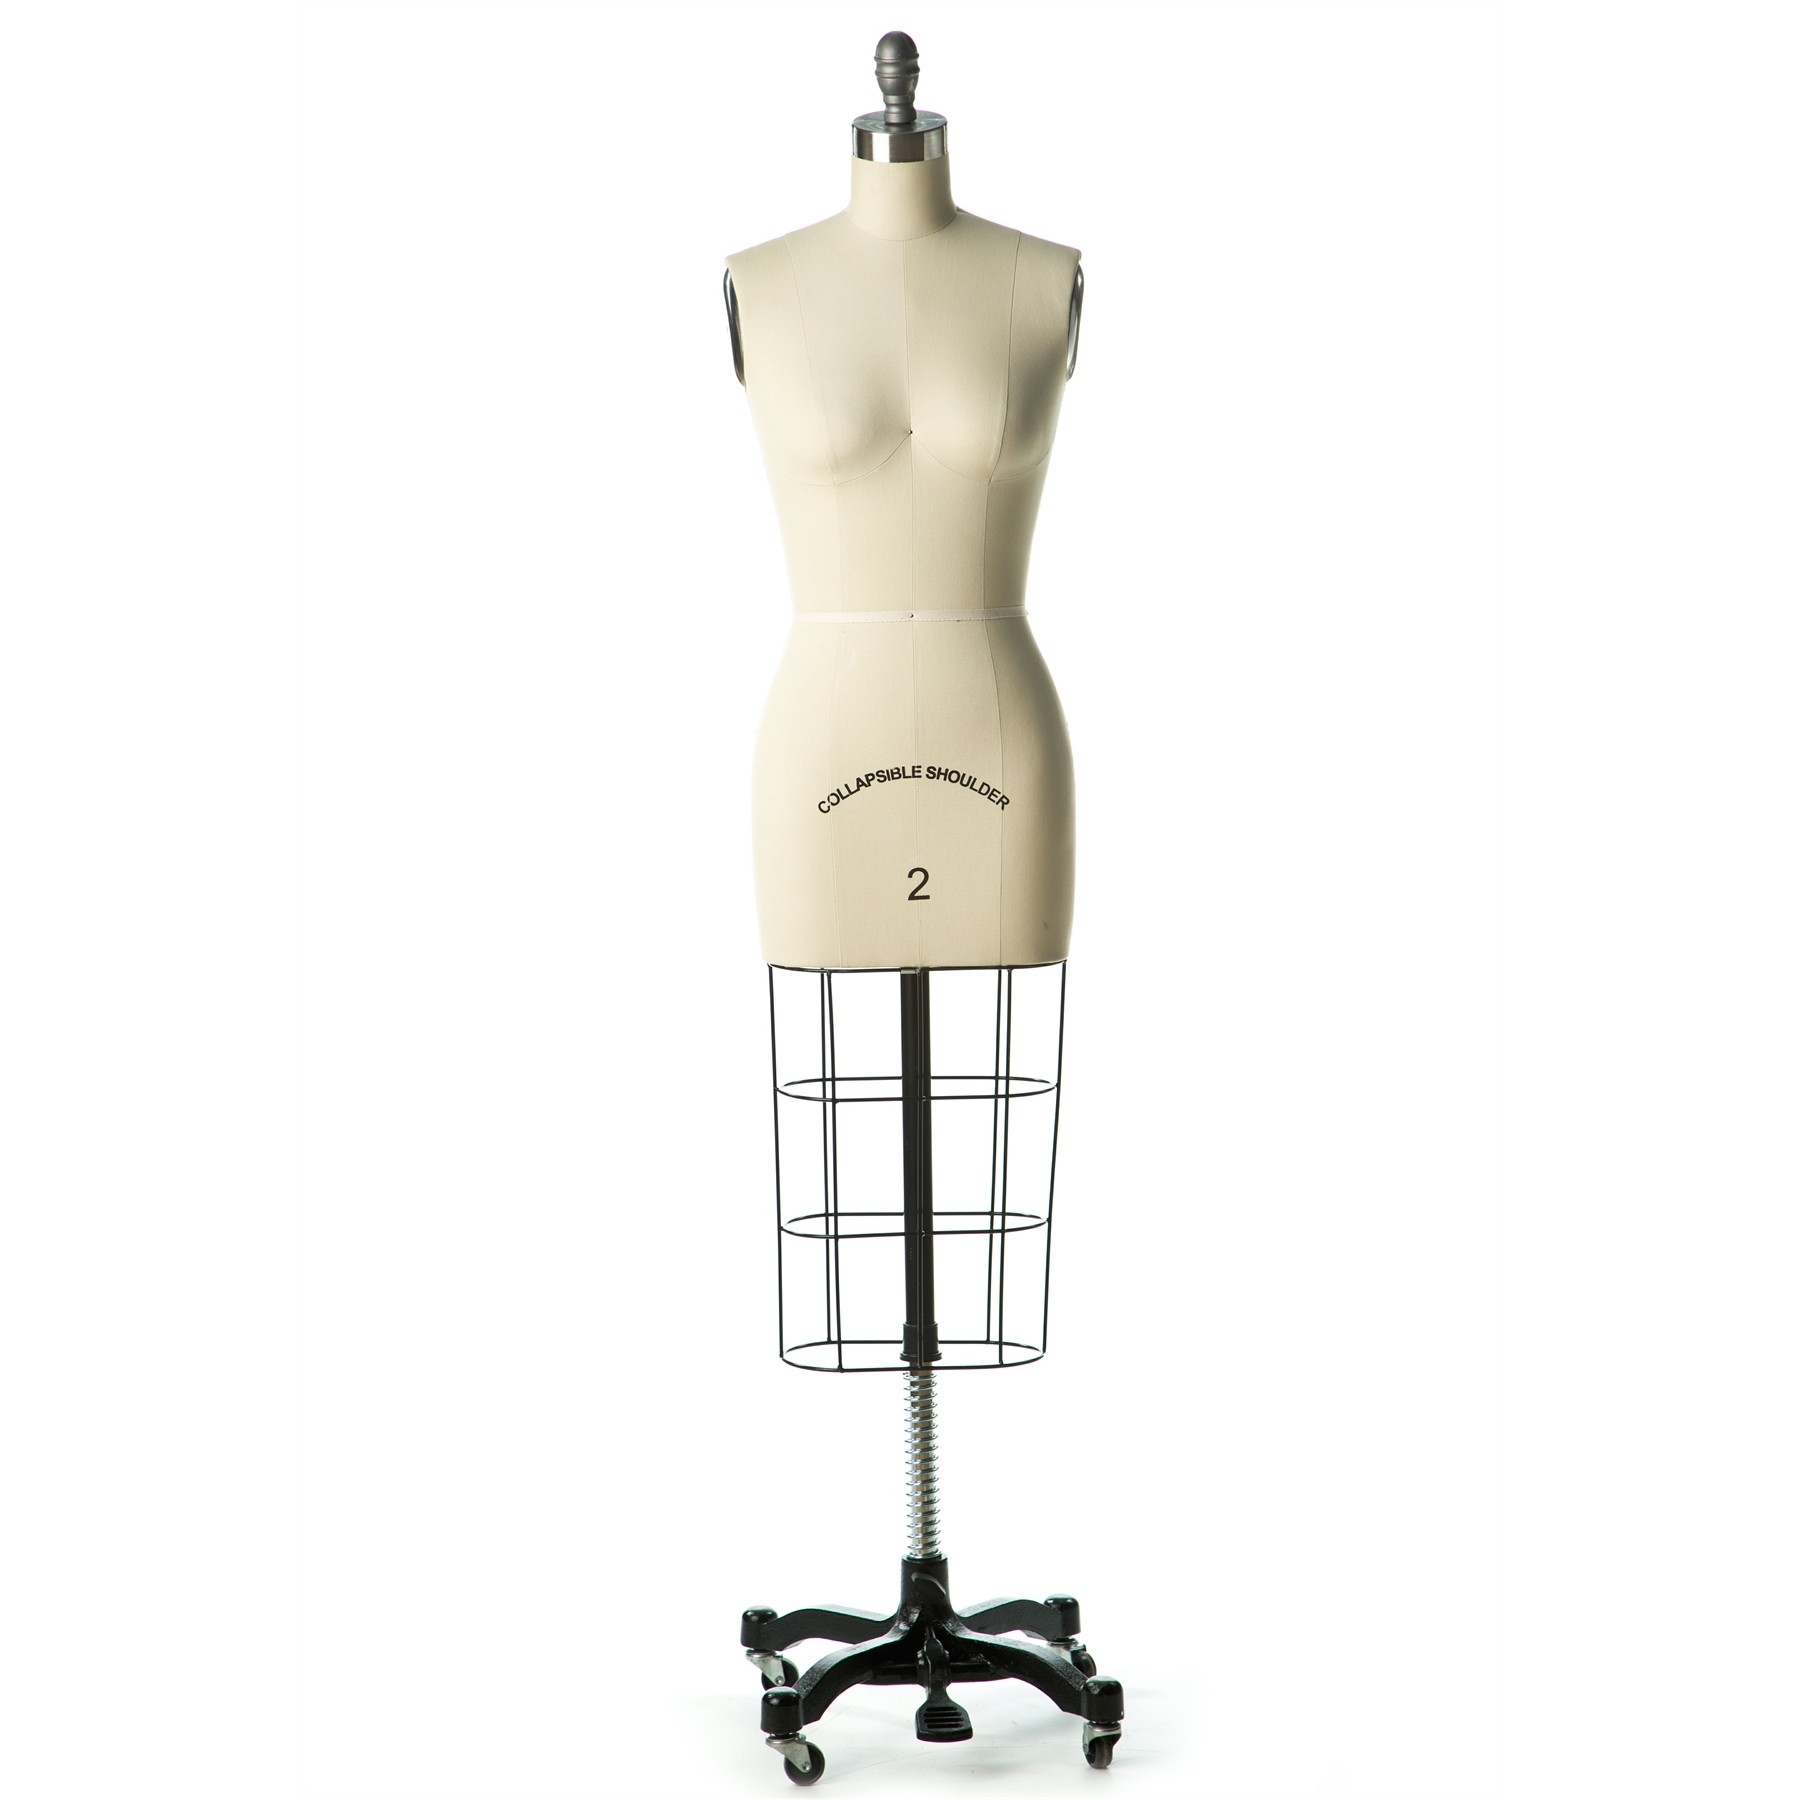 Professional Female Dress Form w/ Collapsible Shoulders | The Shop ...